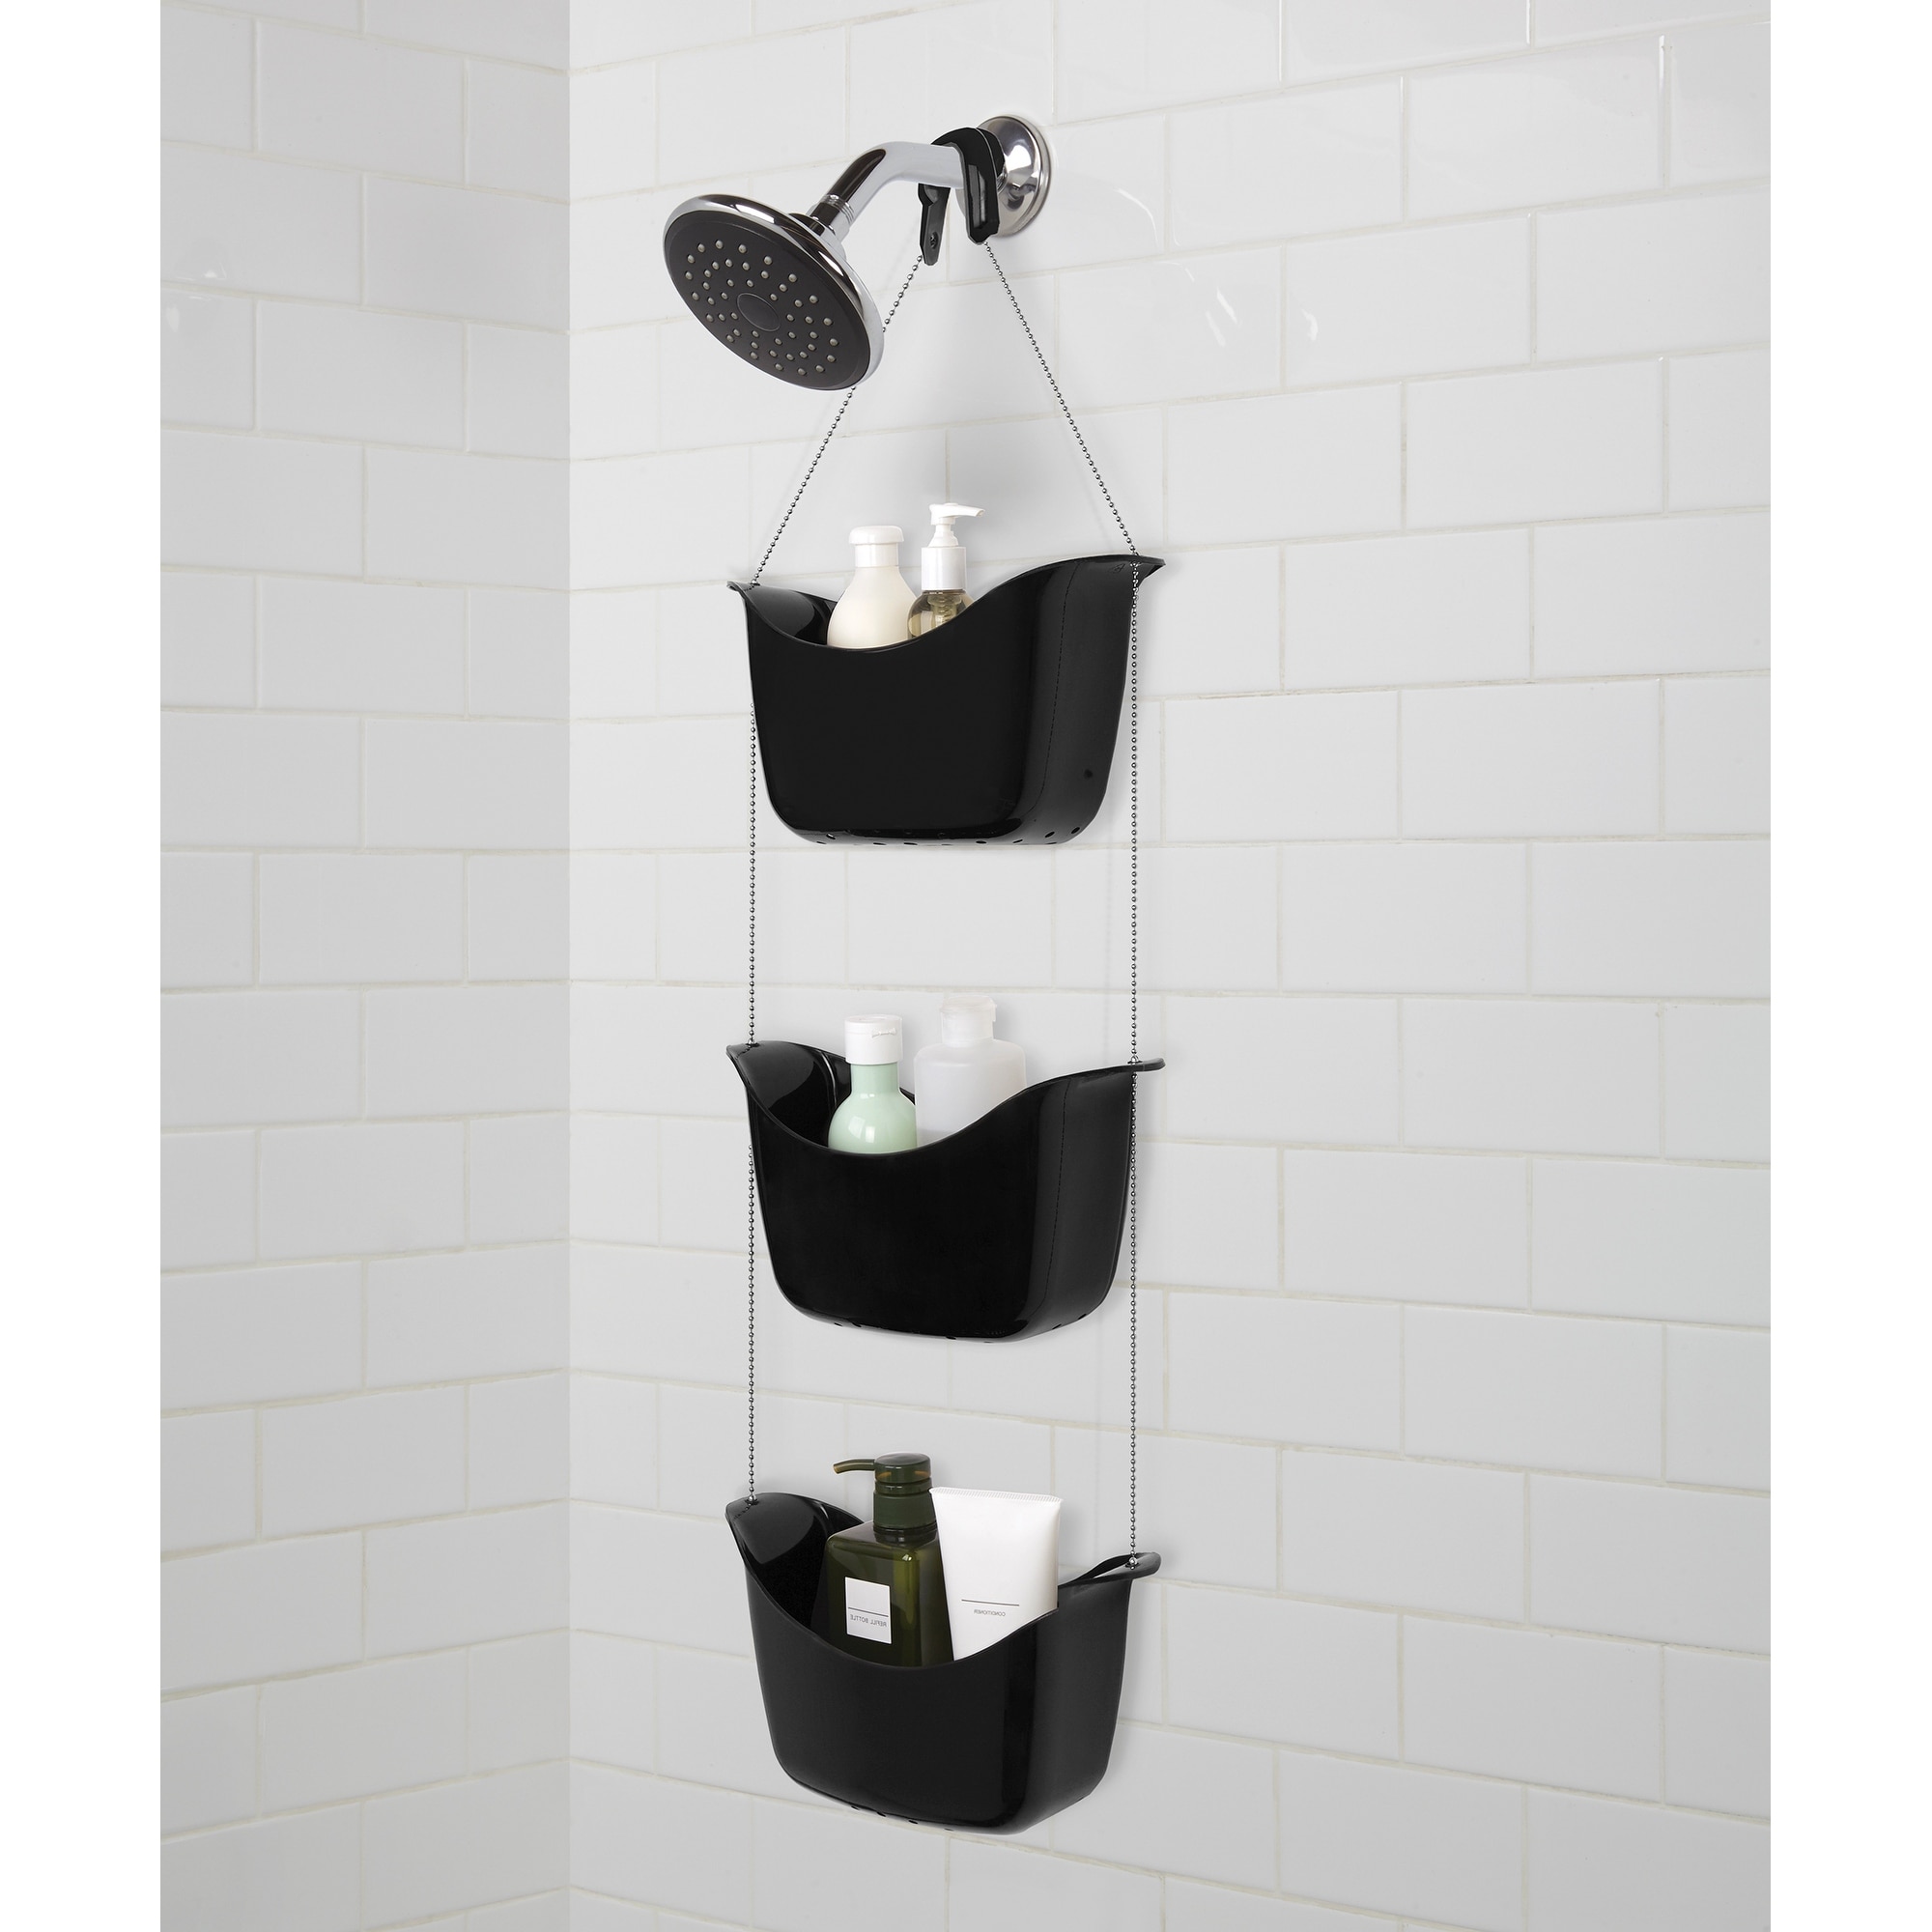 https://ak1.ostkcdn.com/images/products/is/images/direct/3f725c0c2ea43a2c30df8e07554aa8e441956166/Umbra-BASK-Shower-Caddy.jpg